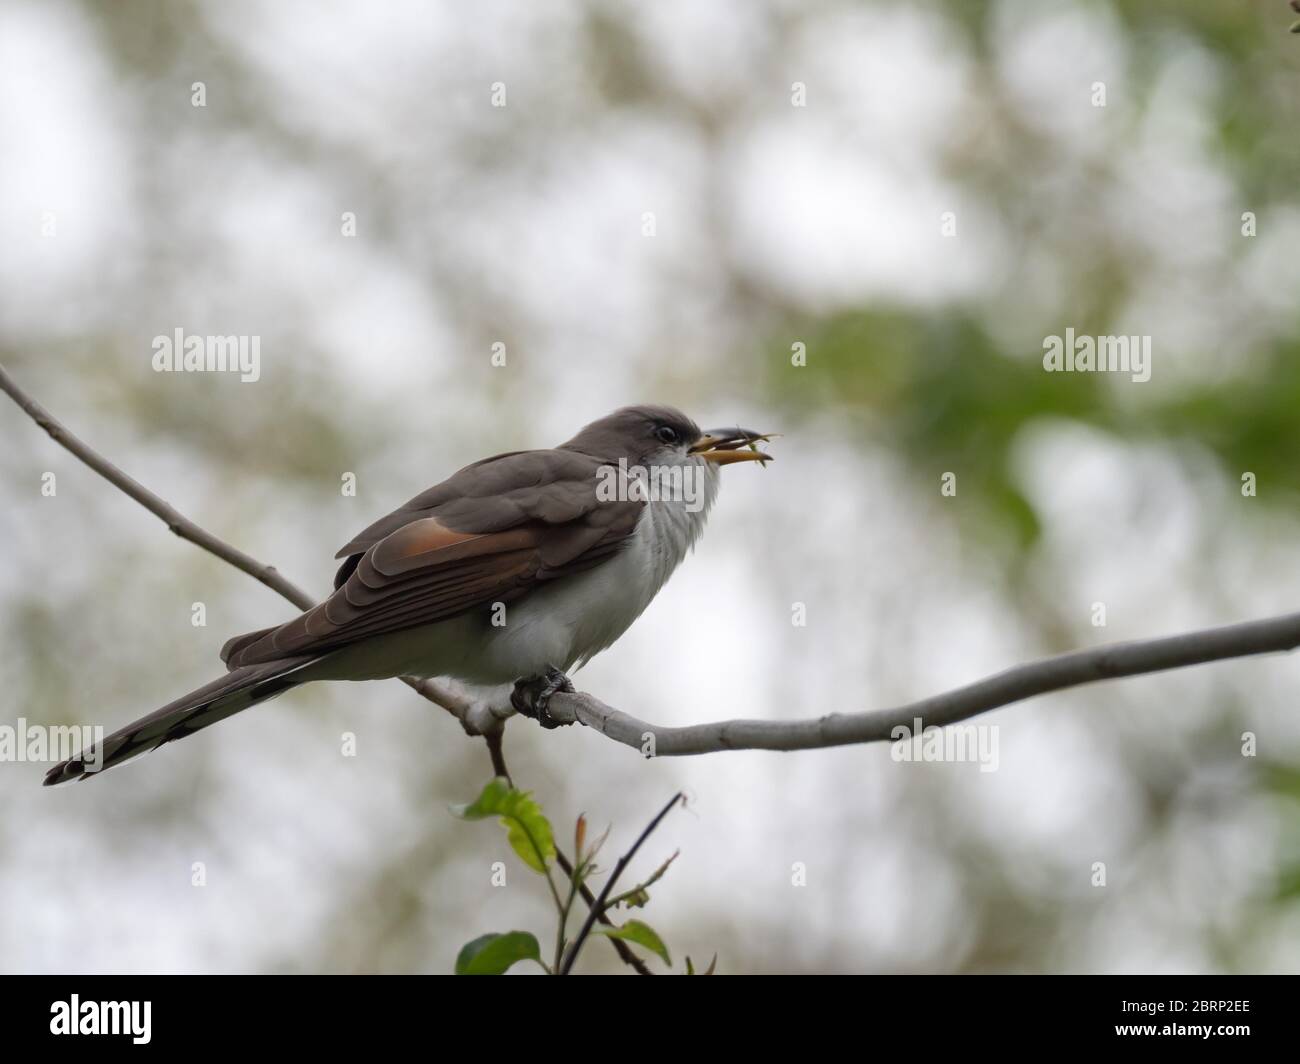 Yellow-billed cuckoo, Coccyzus americanus, a neotropical migrant nesting in the forest of north America Stock Photo